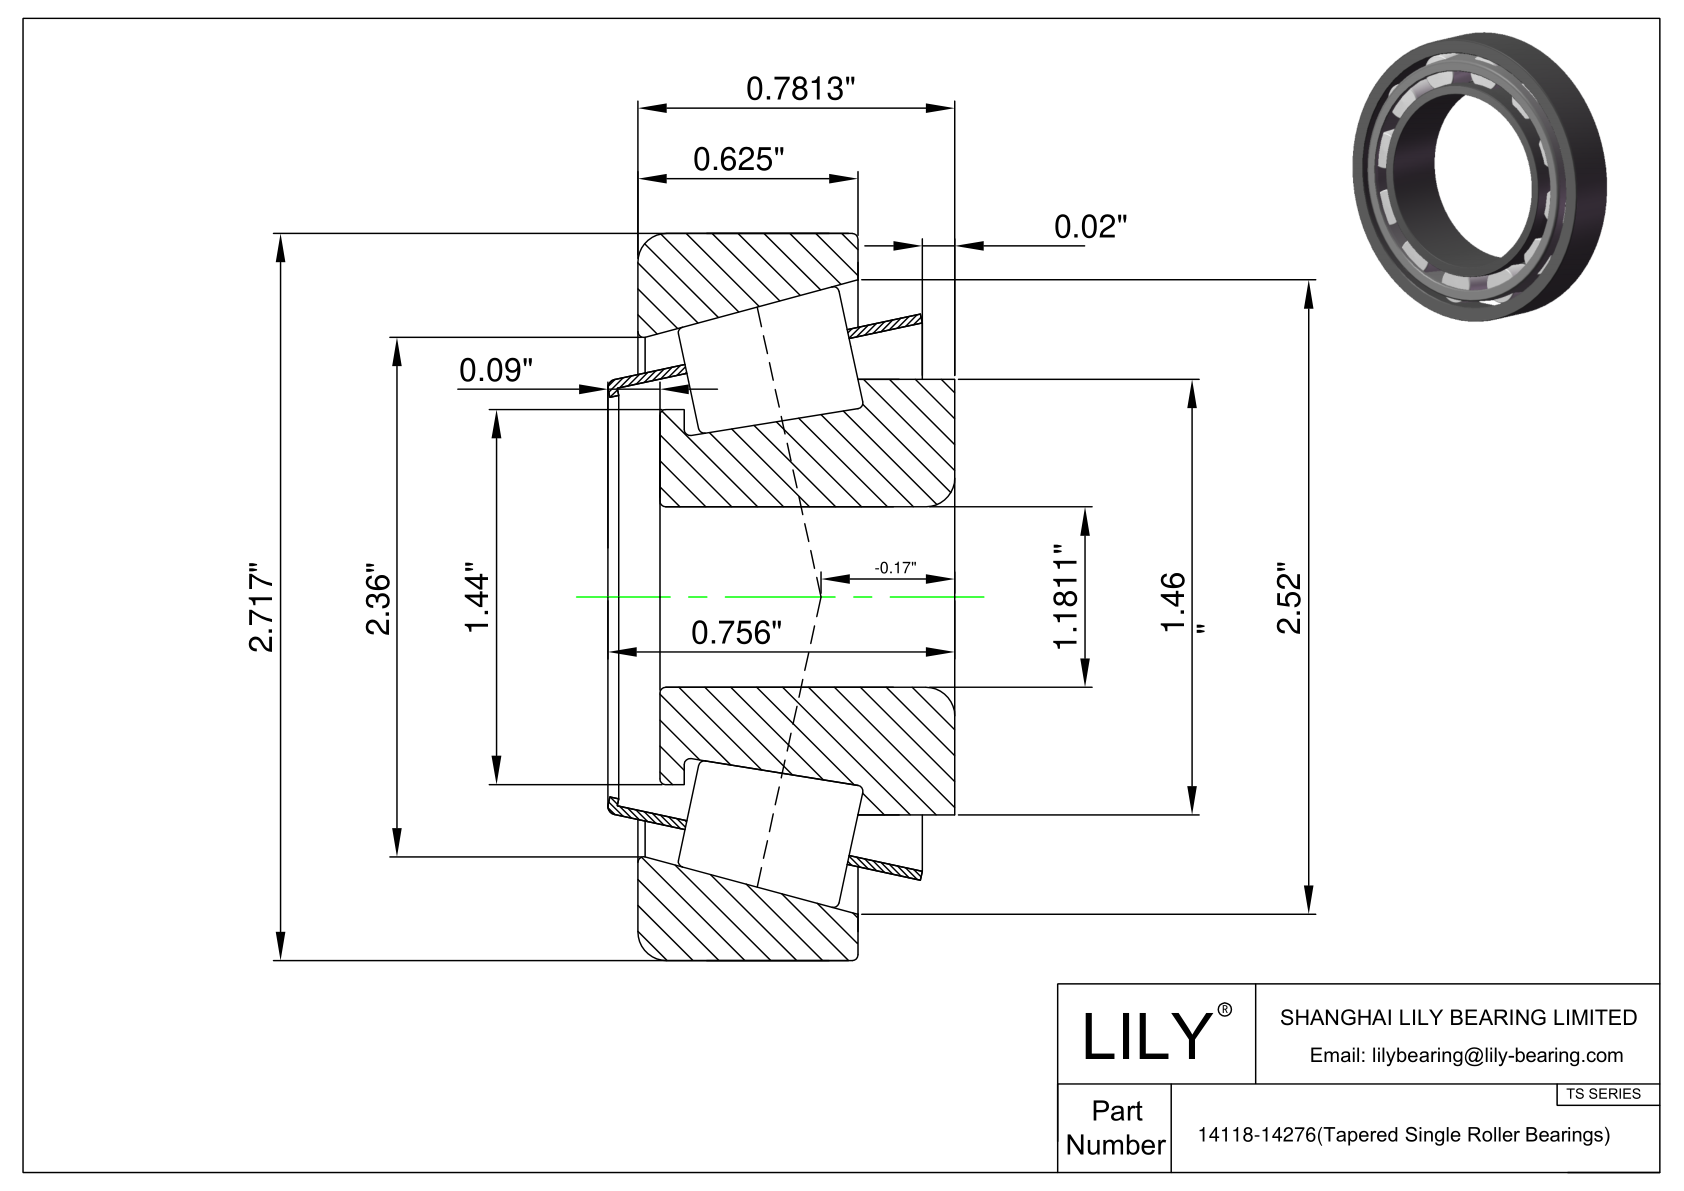 14118-14276 TS (Tapered Single Roller Bearings) (Imperial) cad drawing